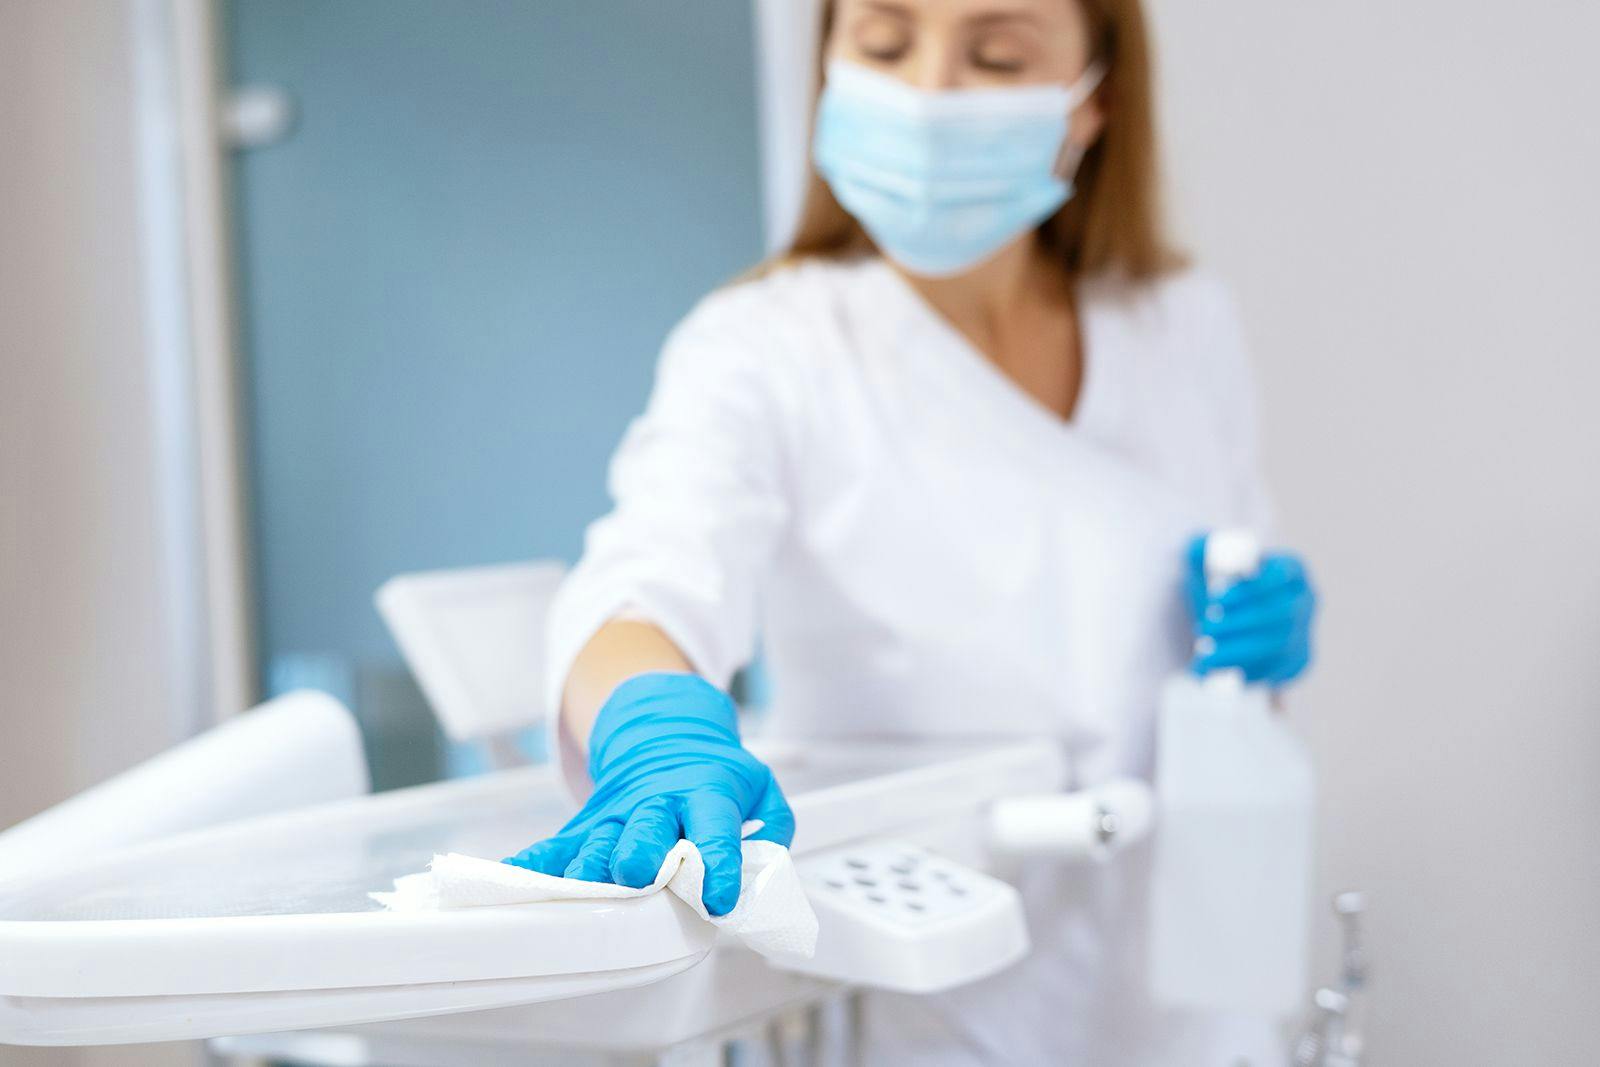 Cleaning a Dental Delivery System Between Patients - brizmaker / stock.adobe.com 474779147